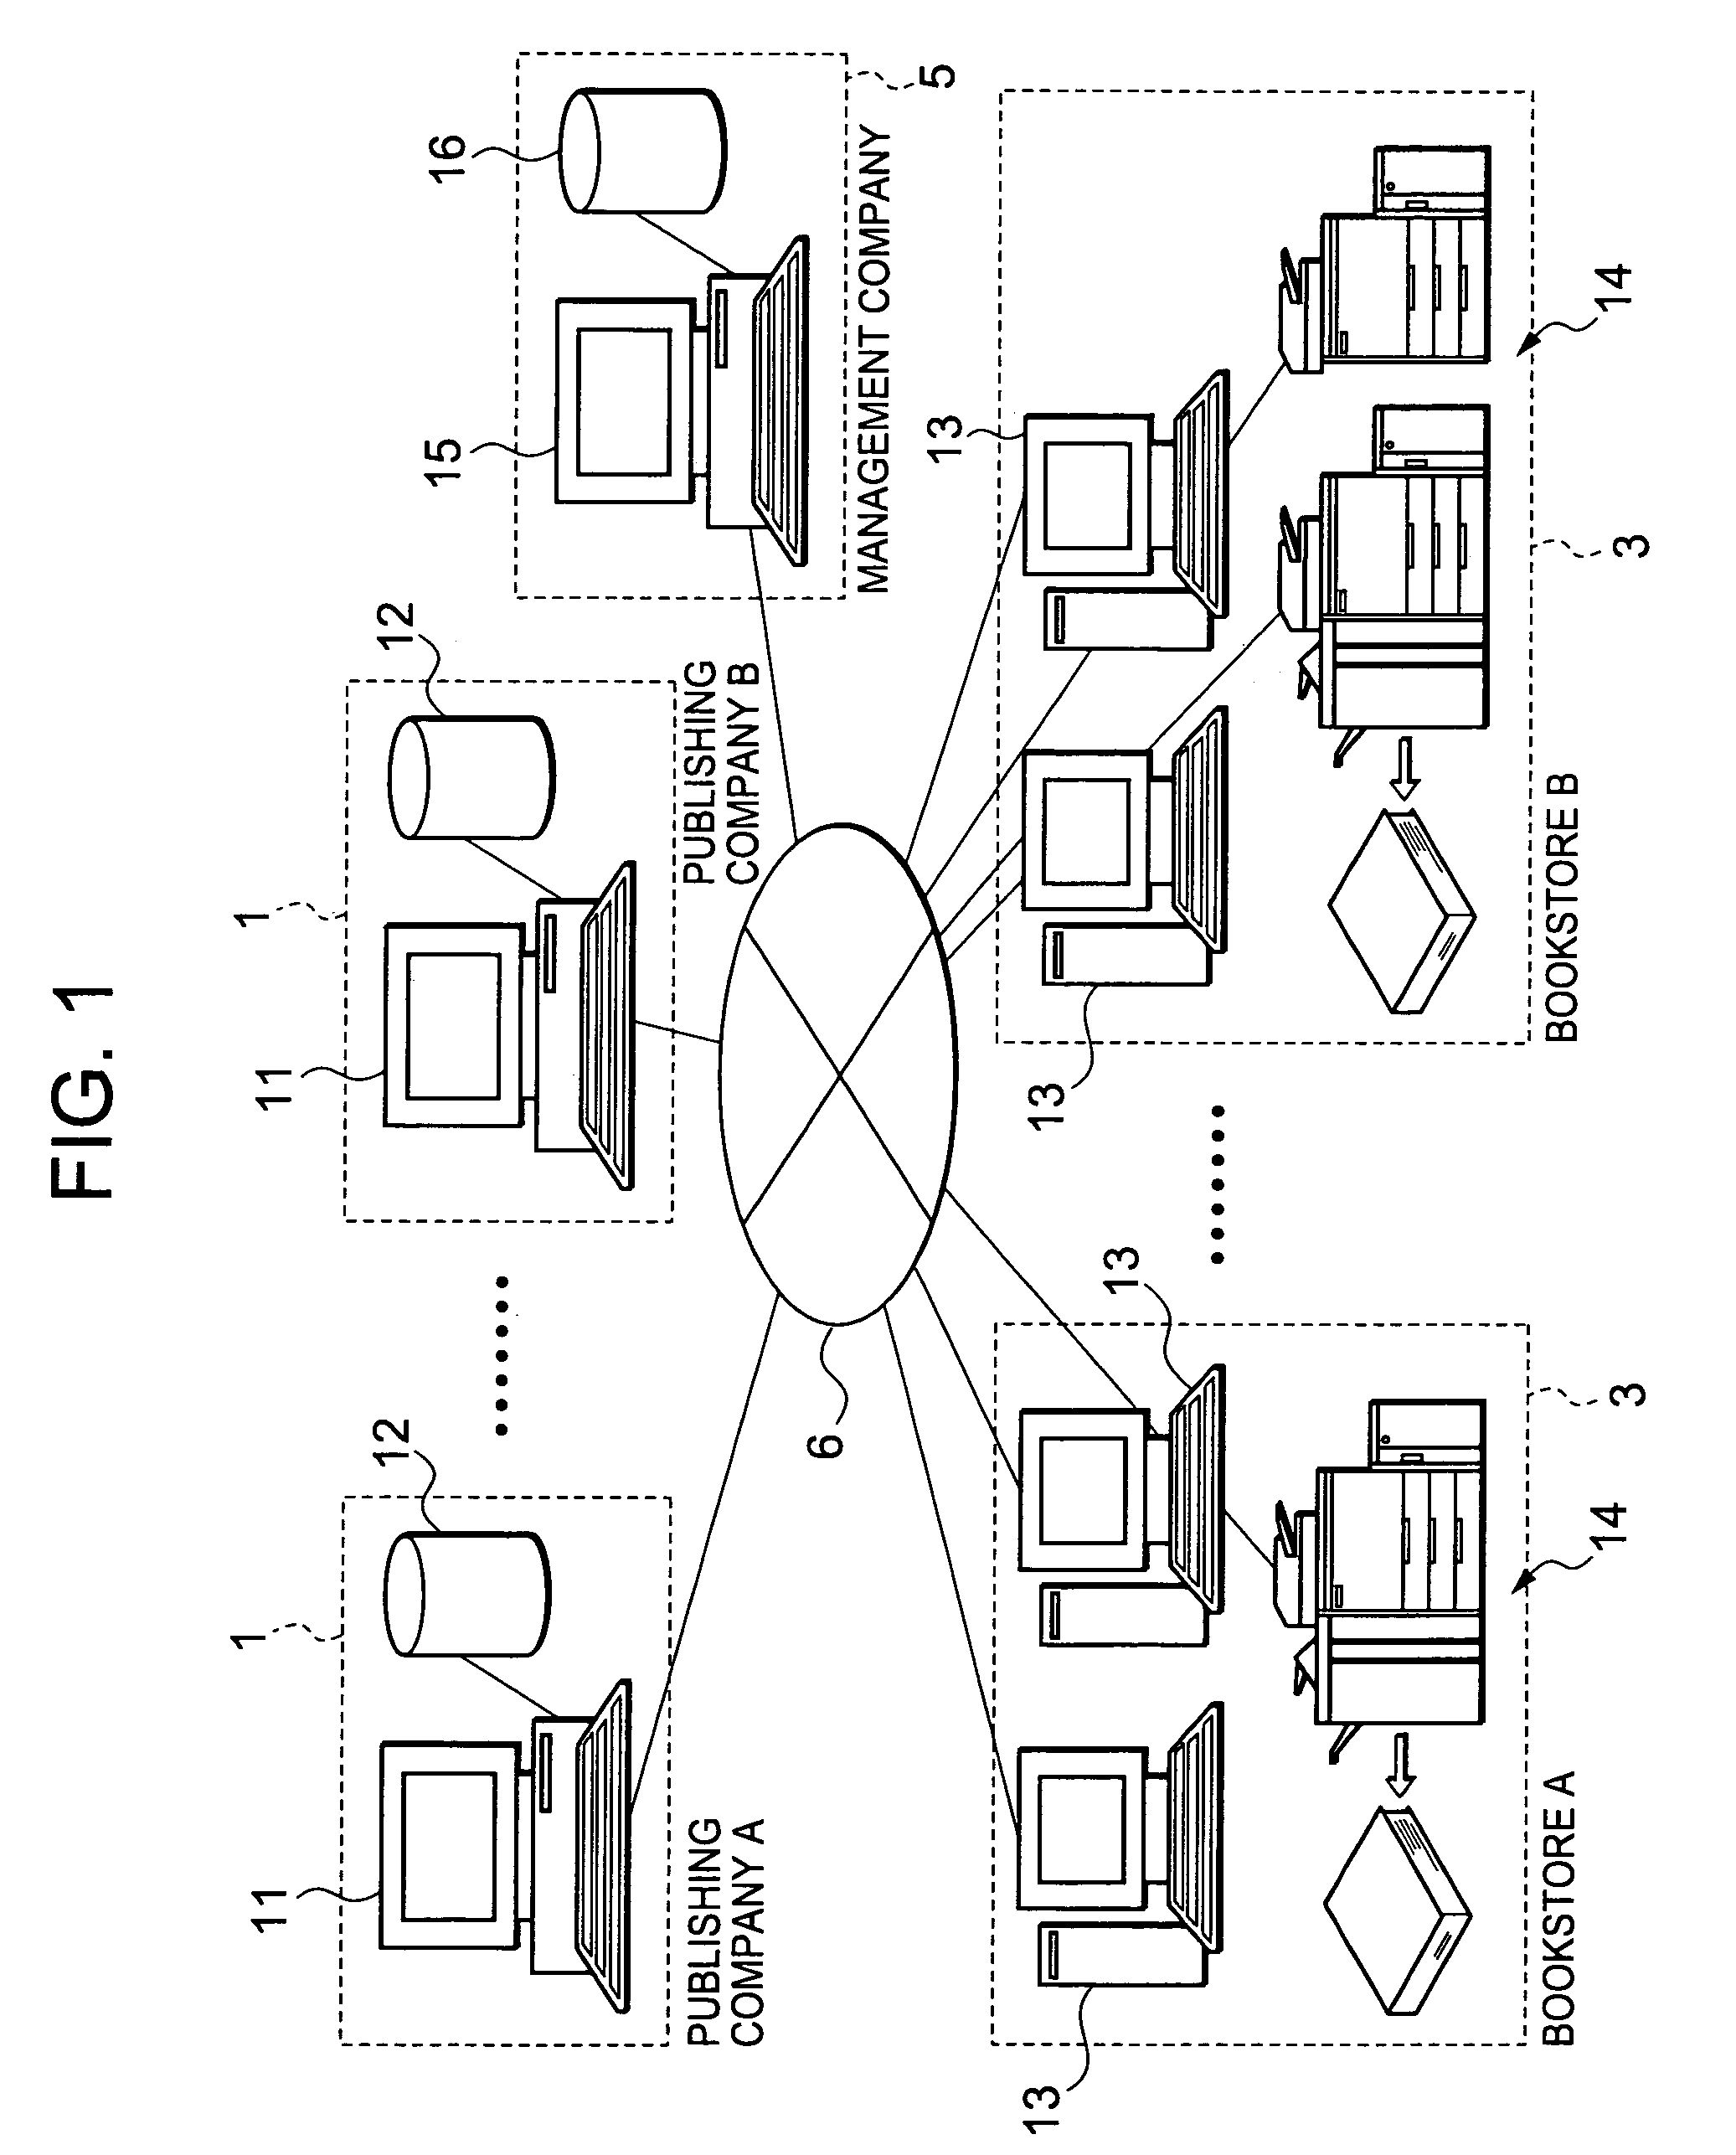 Bookbinding system